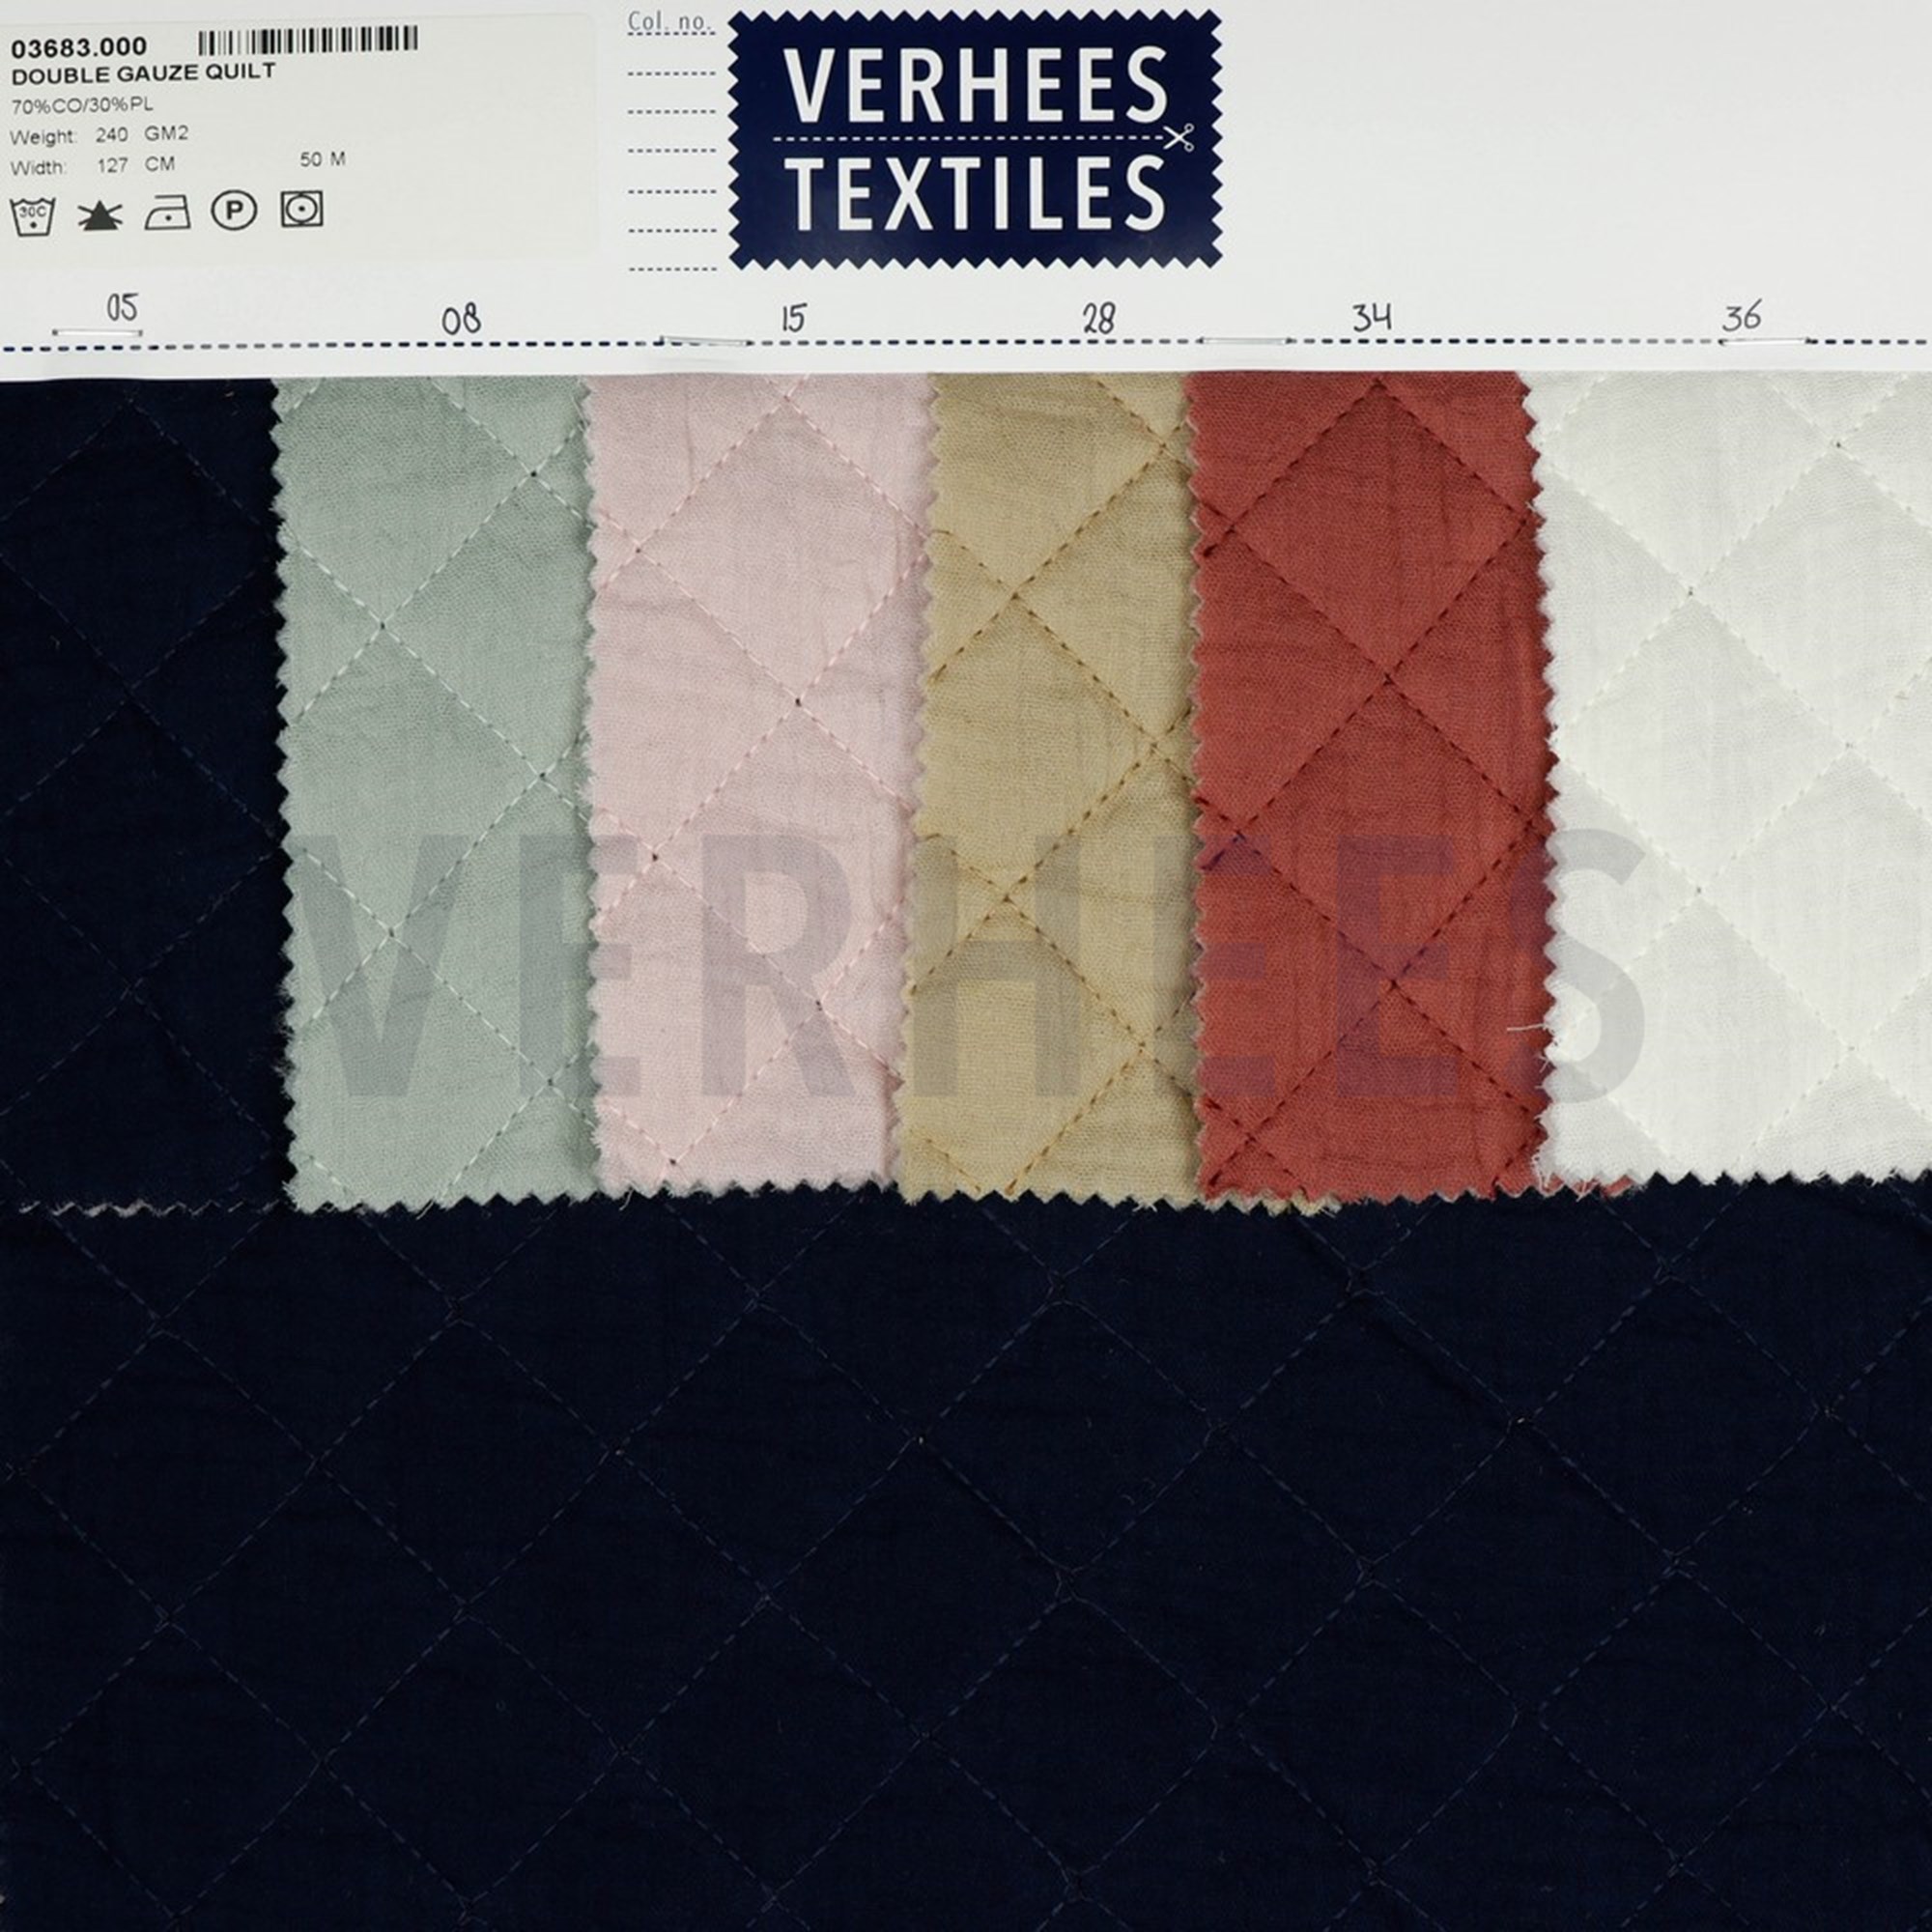 DOUBLE GAUZE QUILT NAVY (high resolution) #4